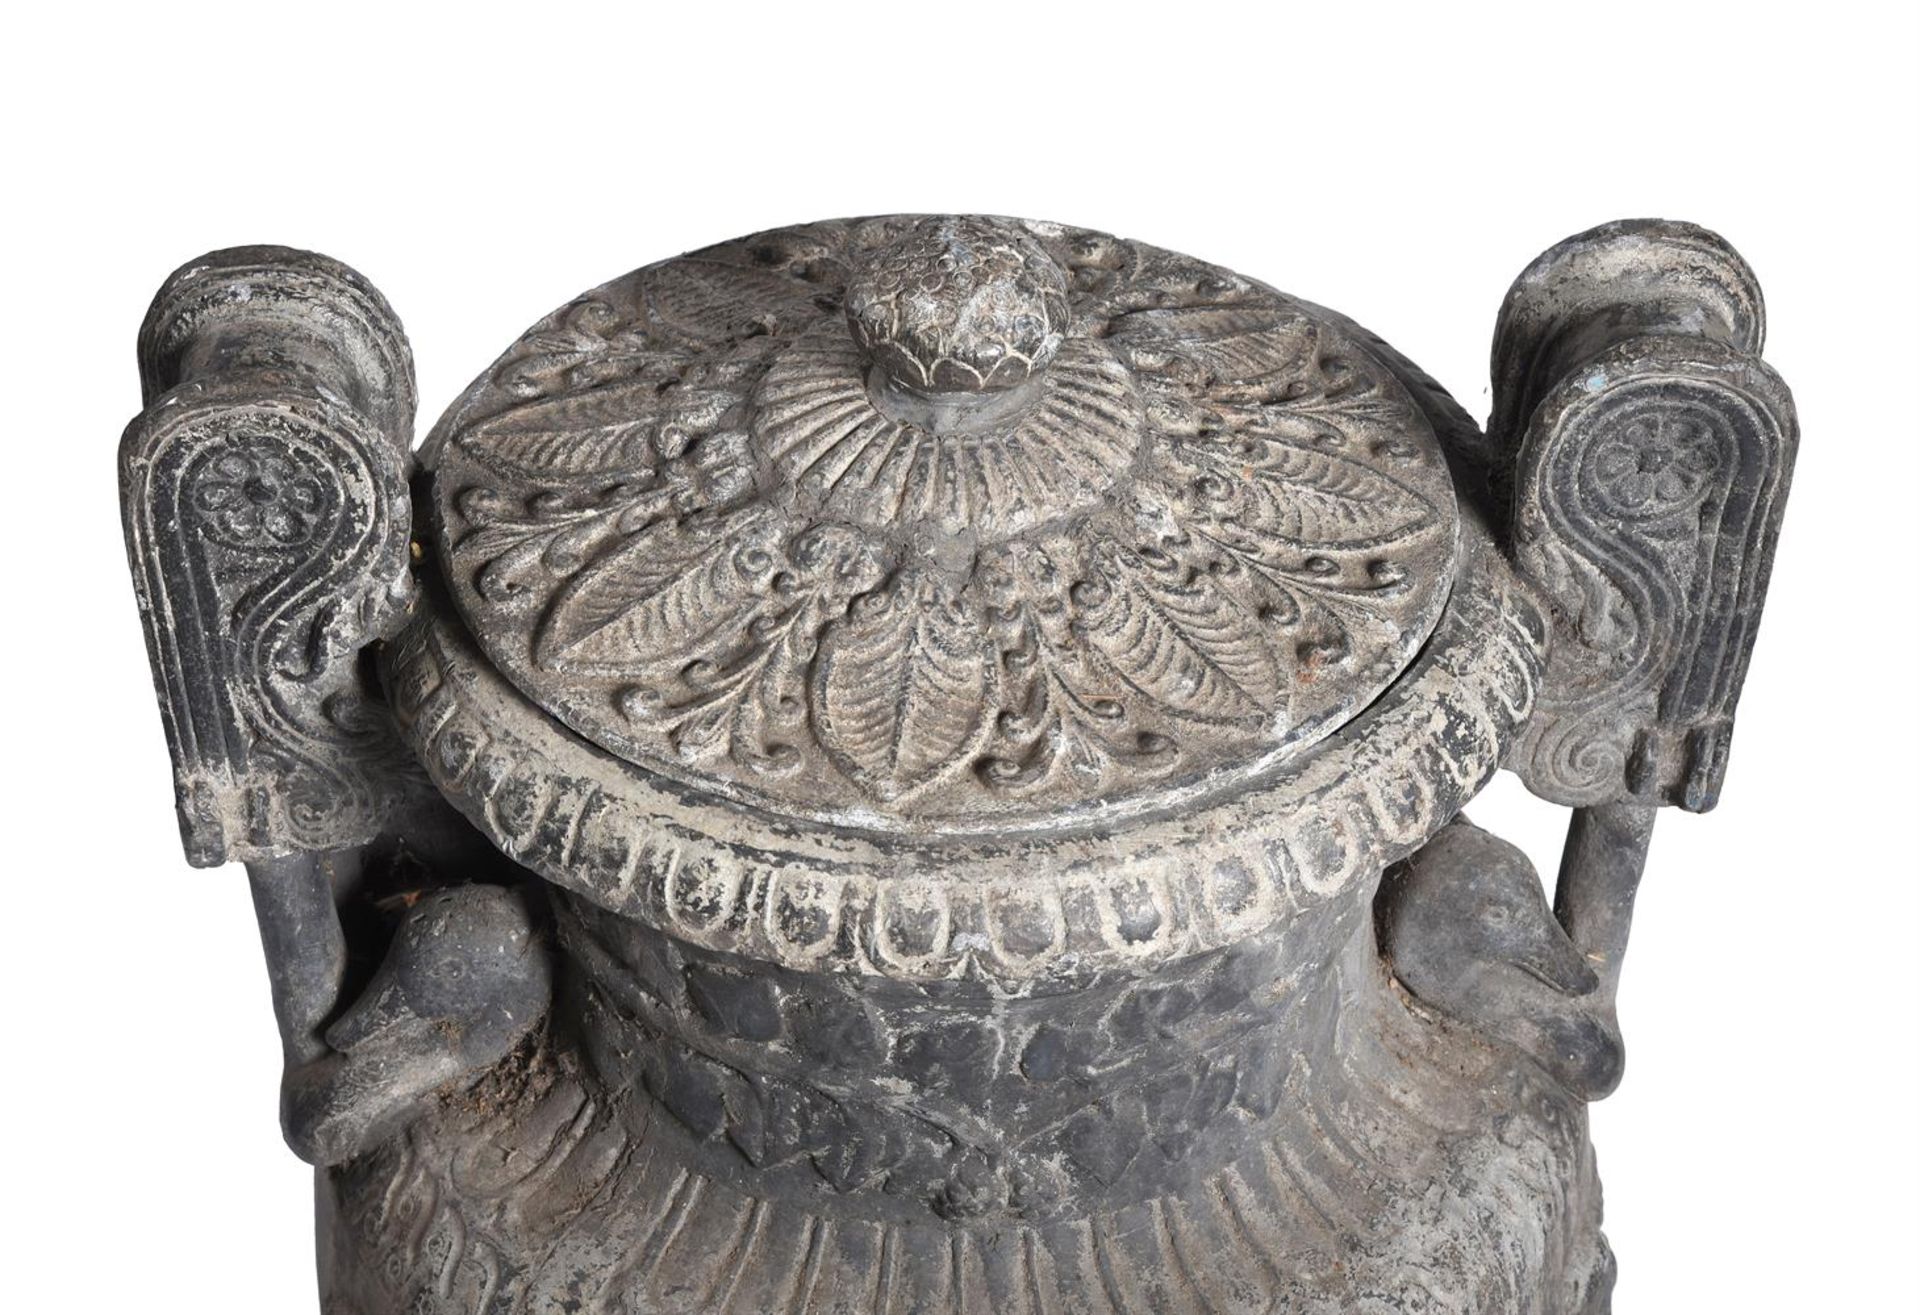 A LARGE TWIN HANDLED LEAD GARDEN URN, POSSIBLY FRENCH, LATE 19TH/EARLY 20TH CENTURY - Image 5 of 5